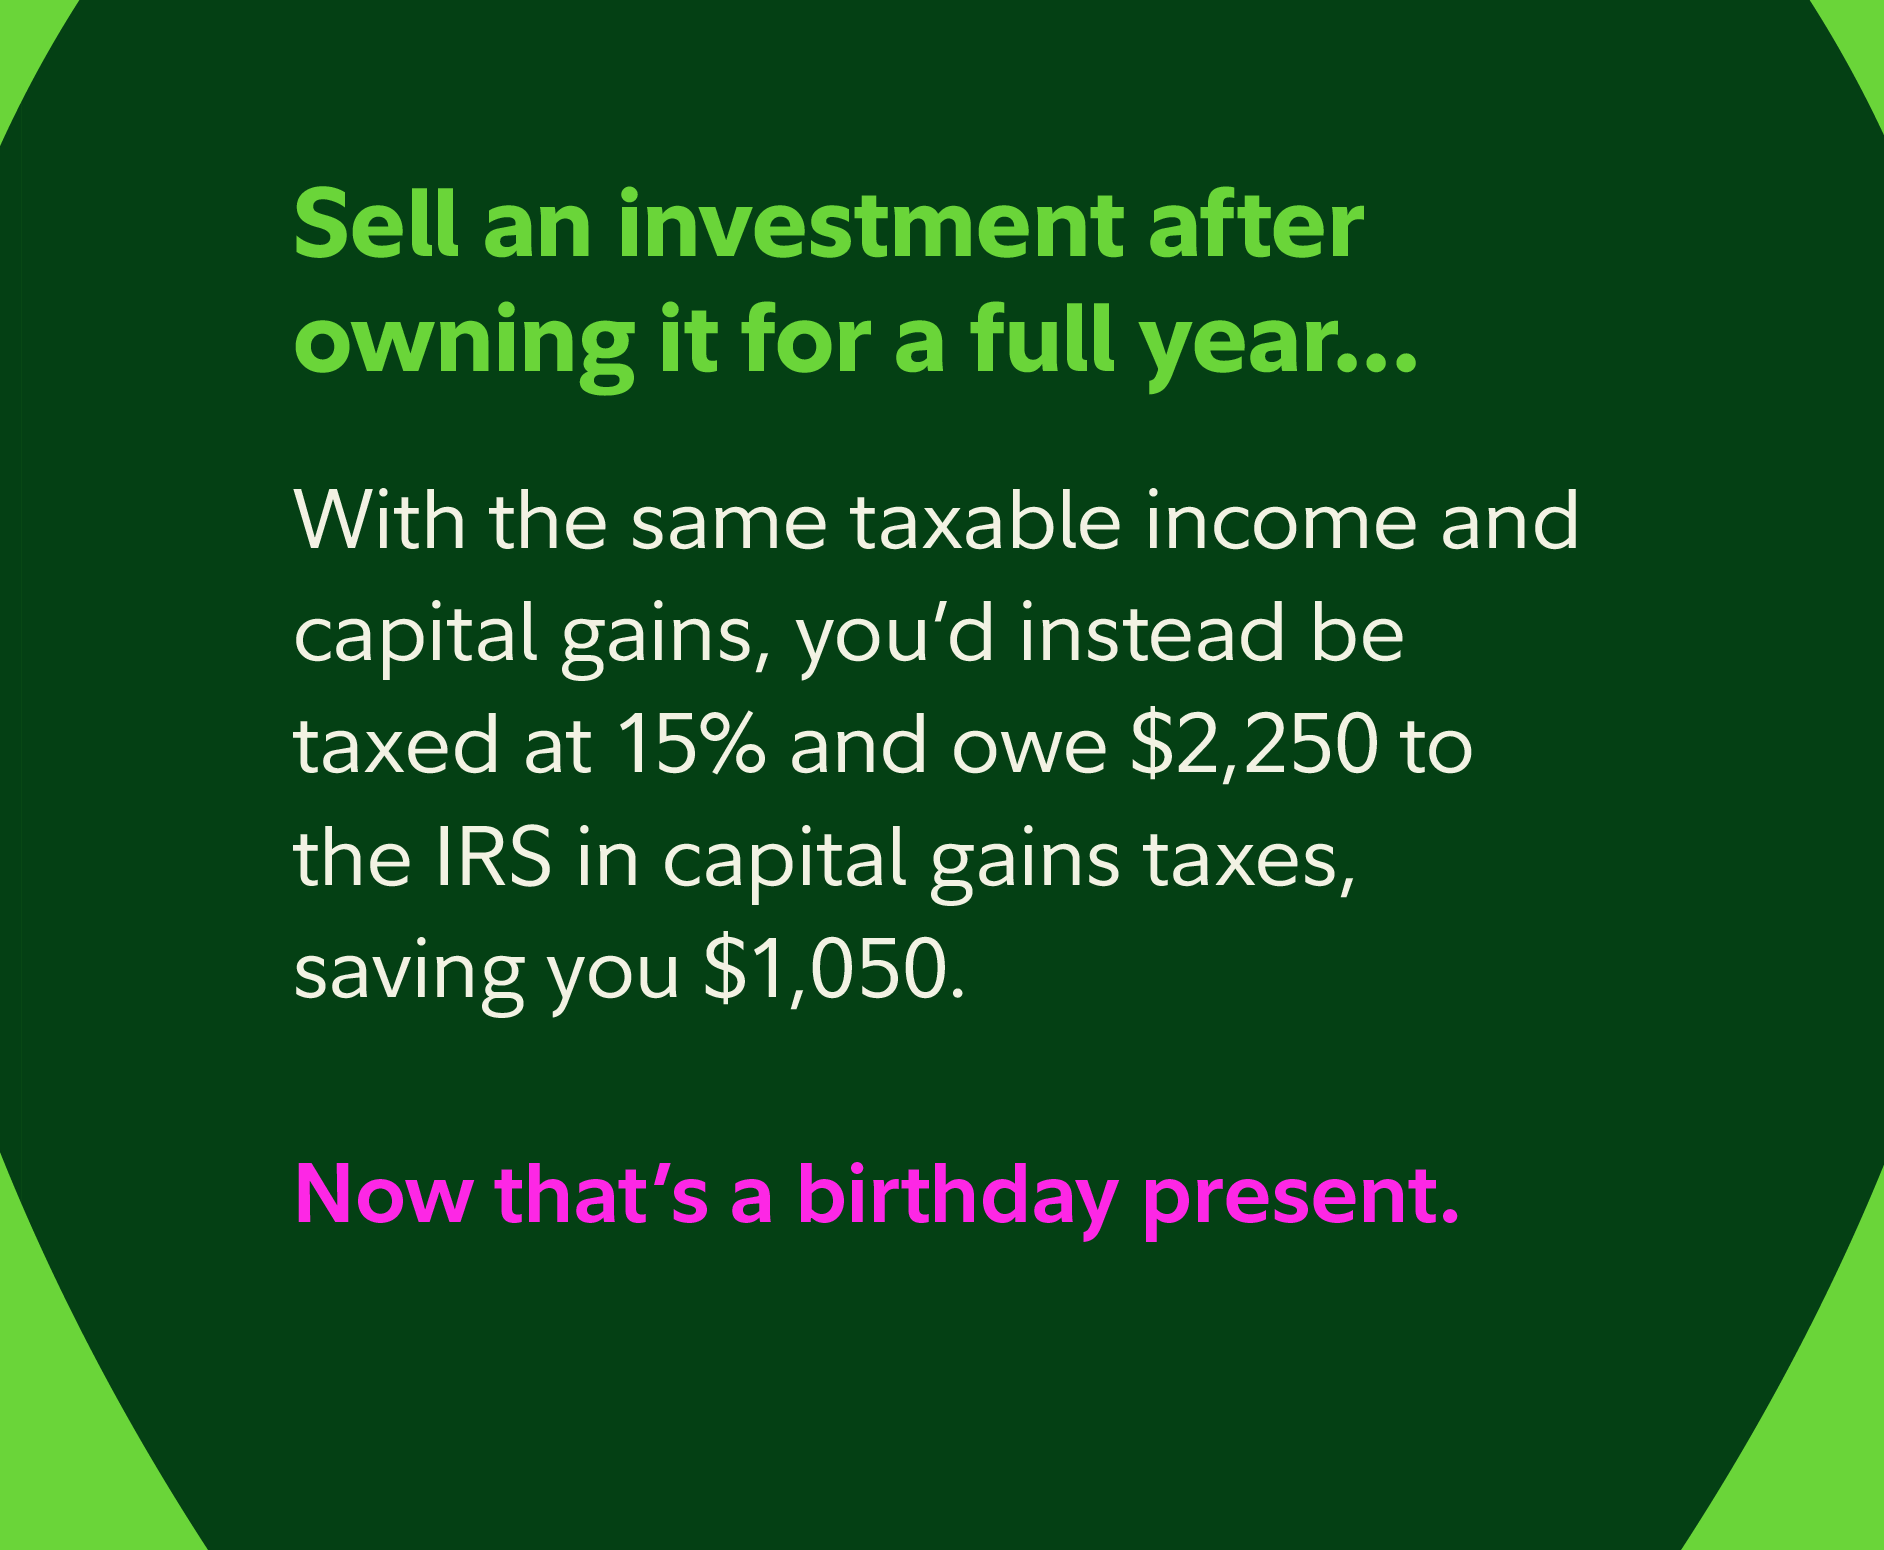 Selling an investment after owning it for a full year: With the same taxable income and capital gains, you'd instead be taxed at 15% and owe $2,250 to the IRS in capital gains taxes, saving you $1,050.